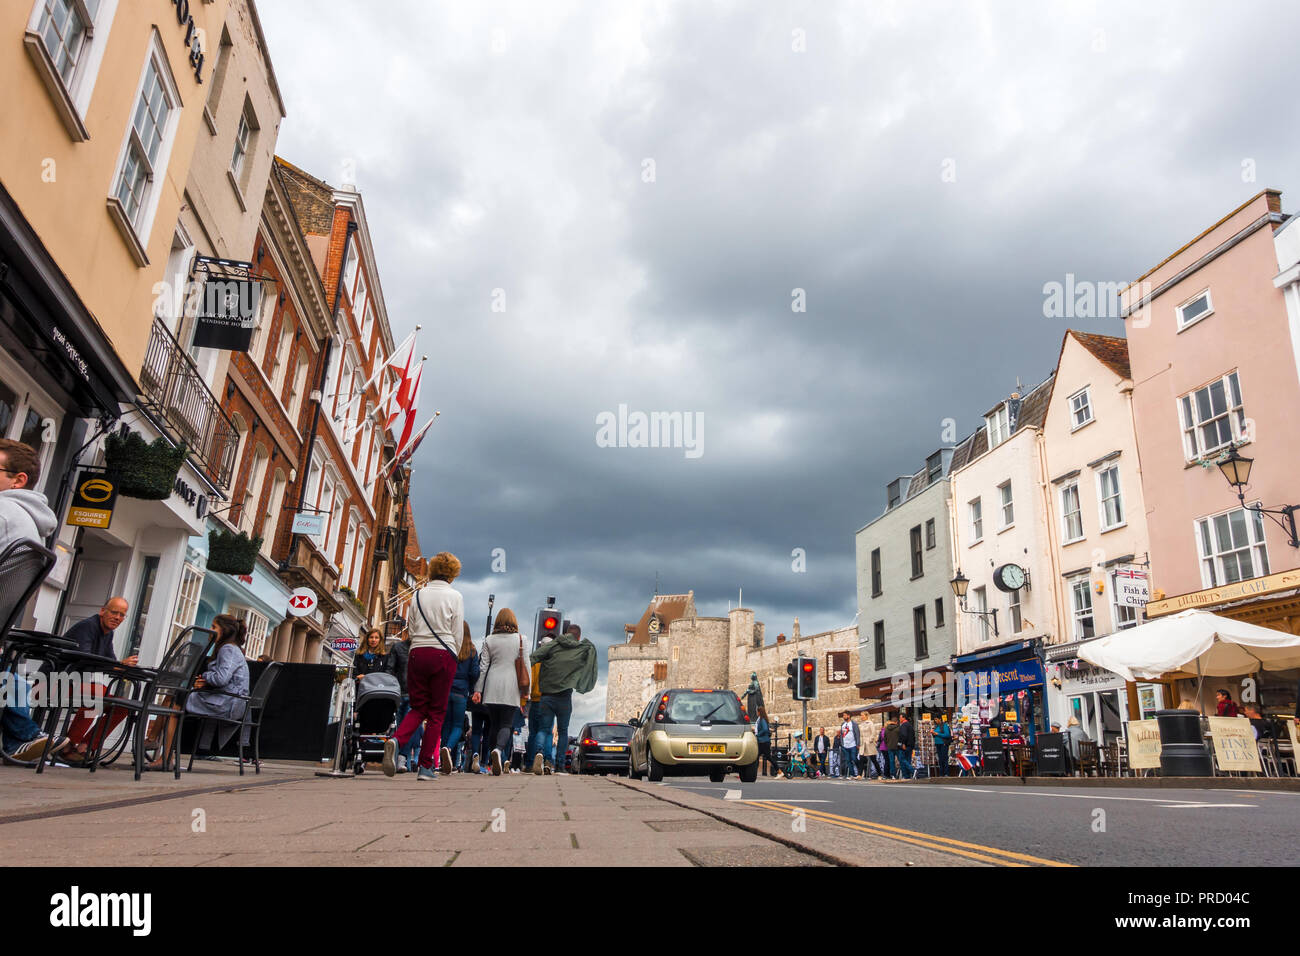 A low angle view of The High Street in Windsor looking towards Windsor Castle on a cloudy autumn day, Stock Photo